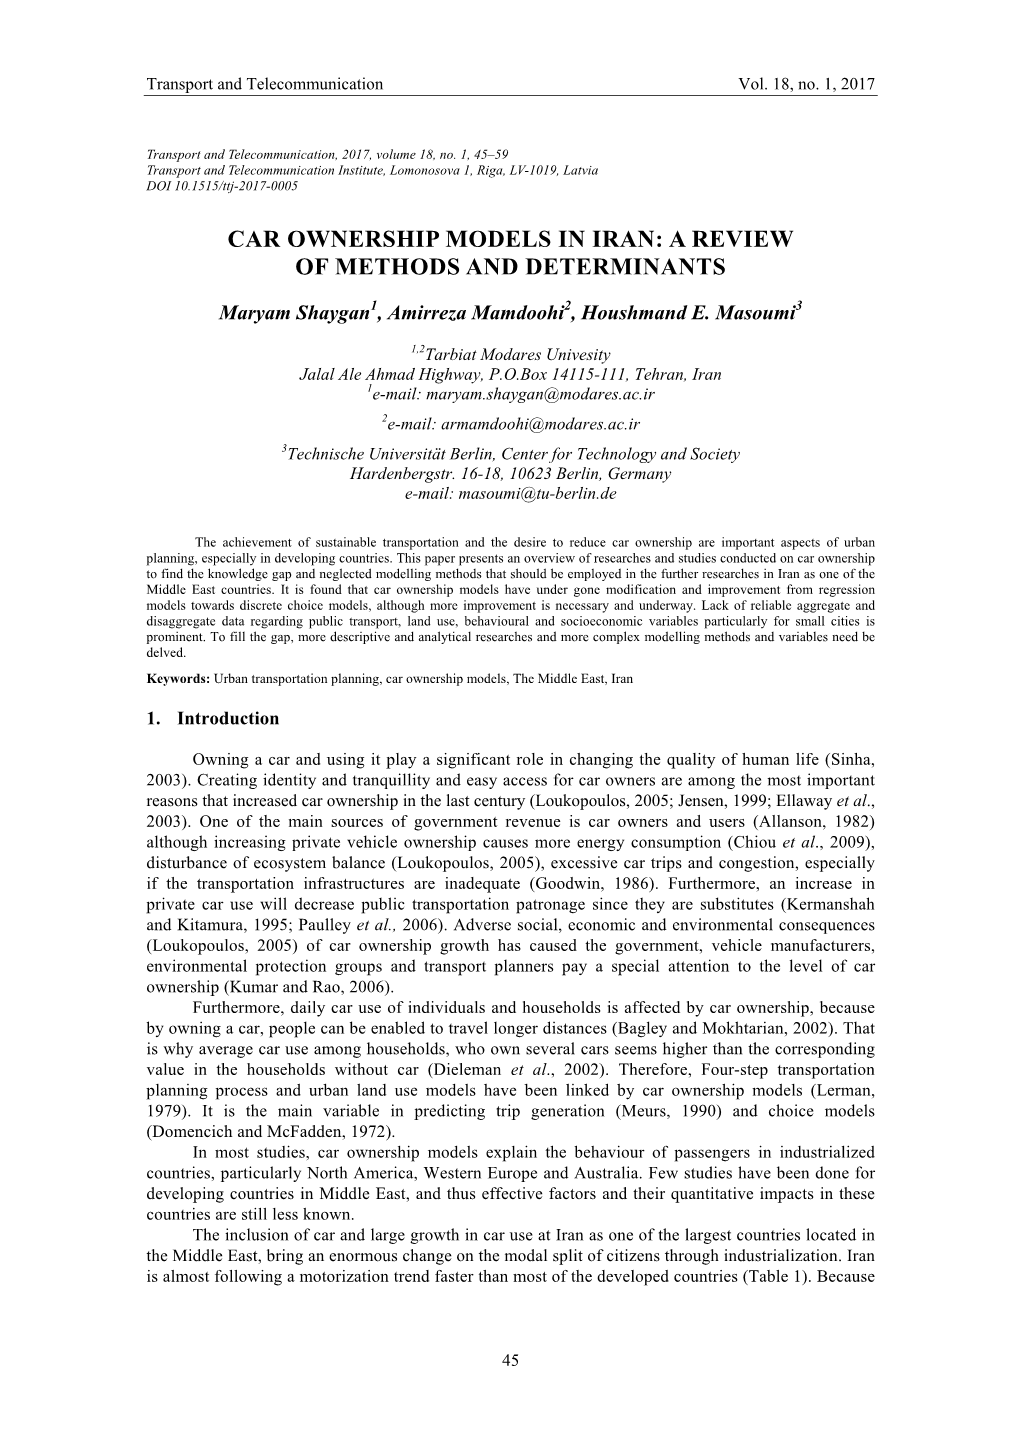 Car Ownership Models in Iran: a Review of Methods and Determinants